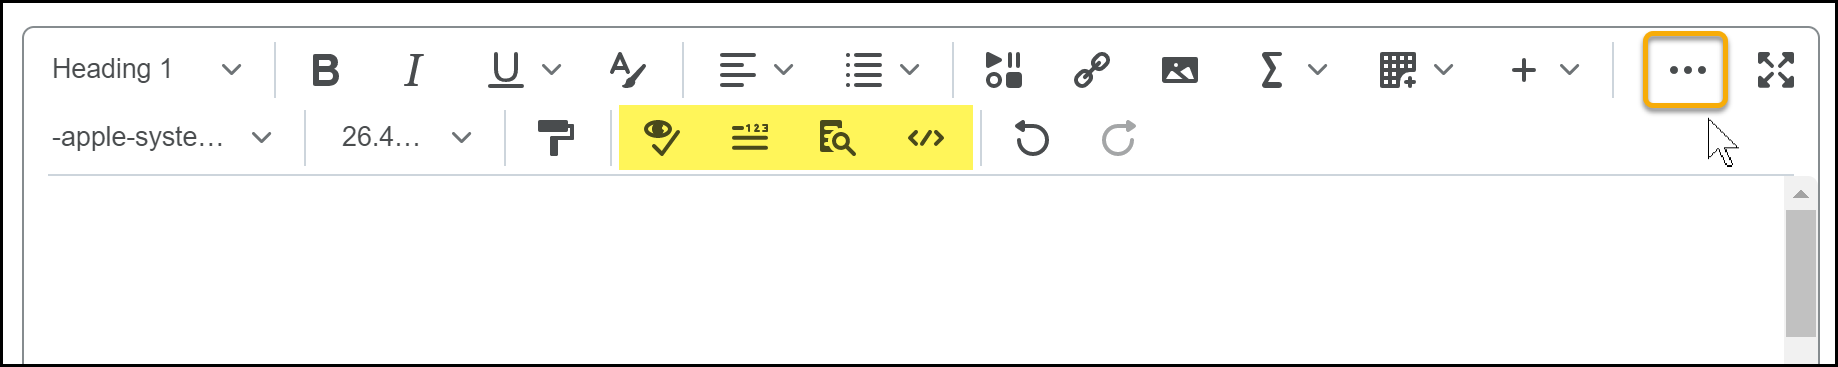 Old toolbar items, check accessibility, spell check, edit HTML, and Preview moved to top bar.